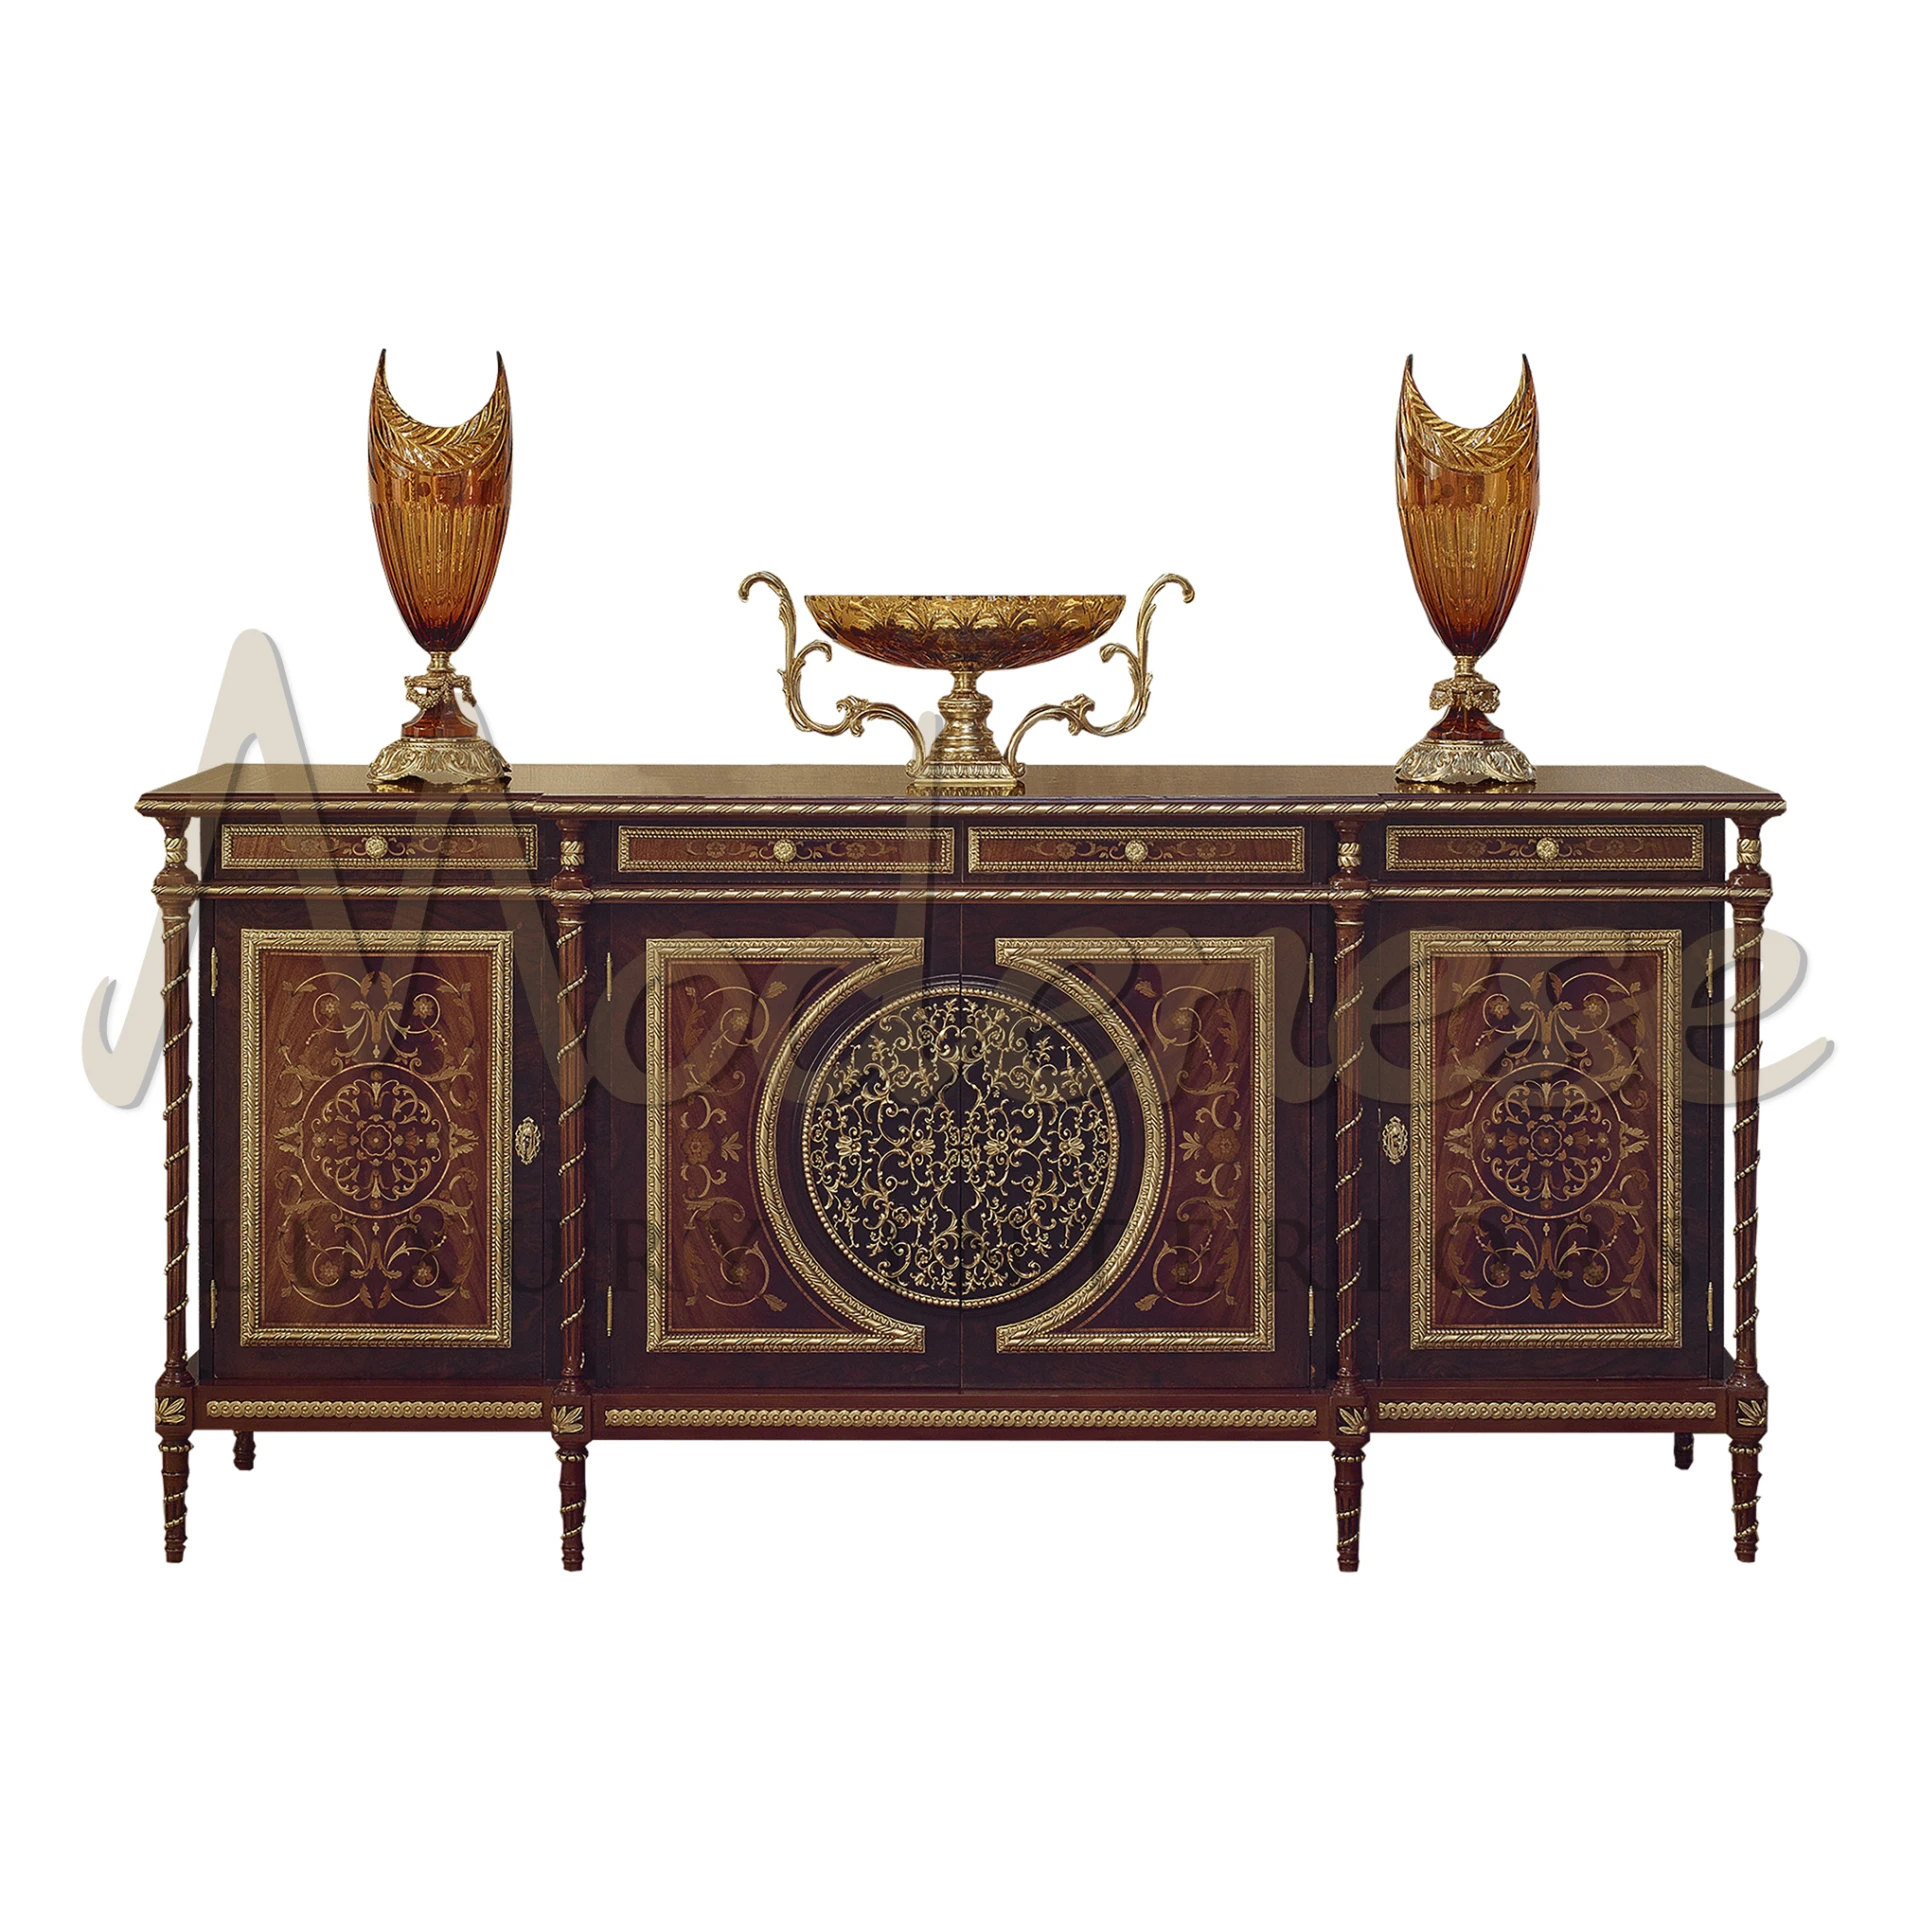 Classic walnut finish adorned with floral inlay and hand-carved gold leaf accents. Ample storage with drawers and compartments.